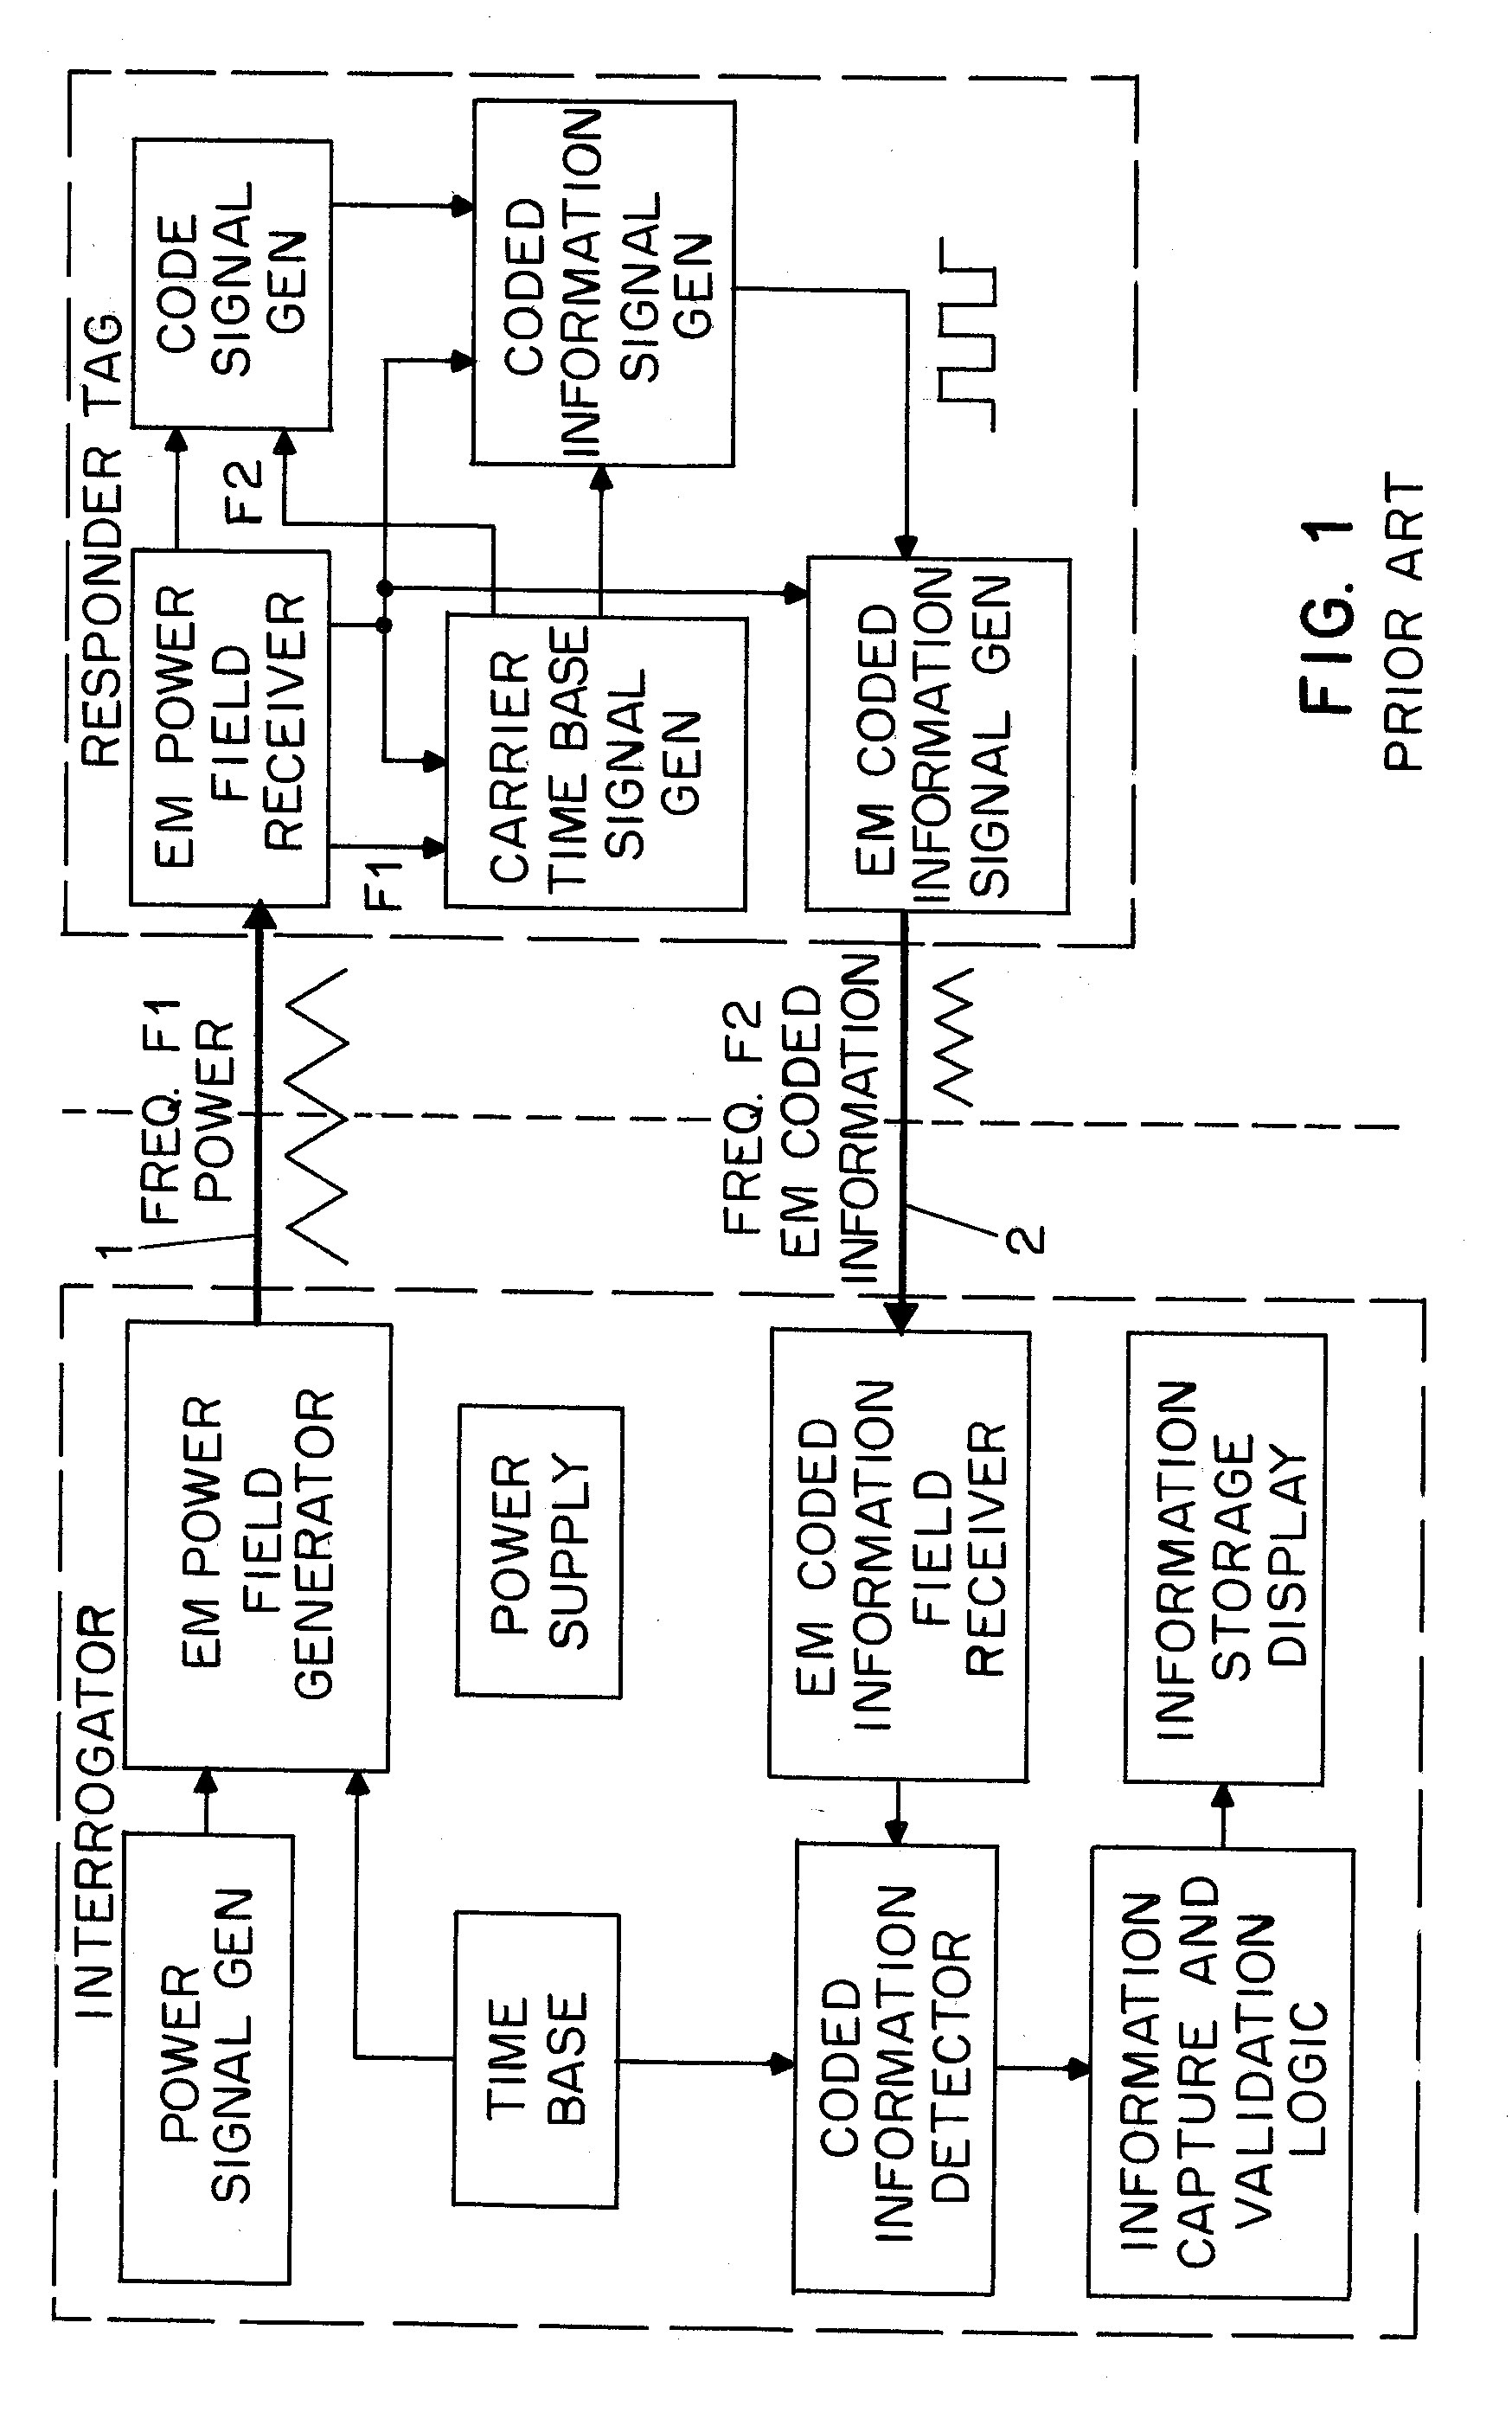 Radio tag and system